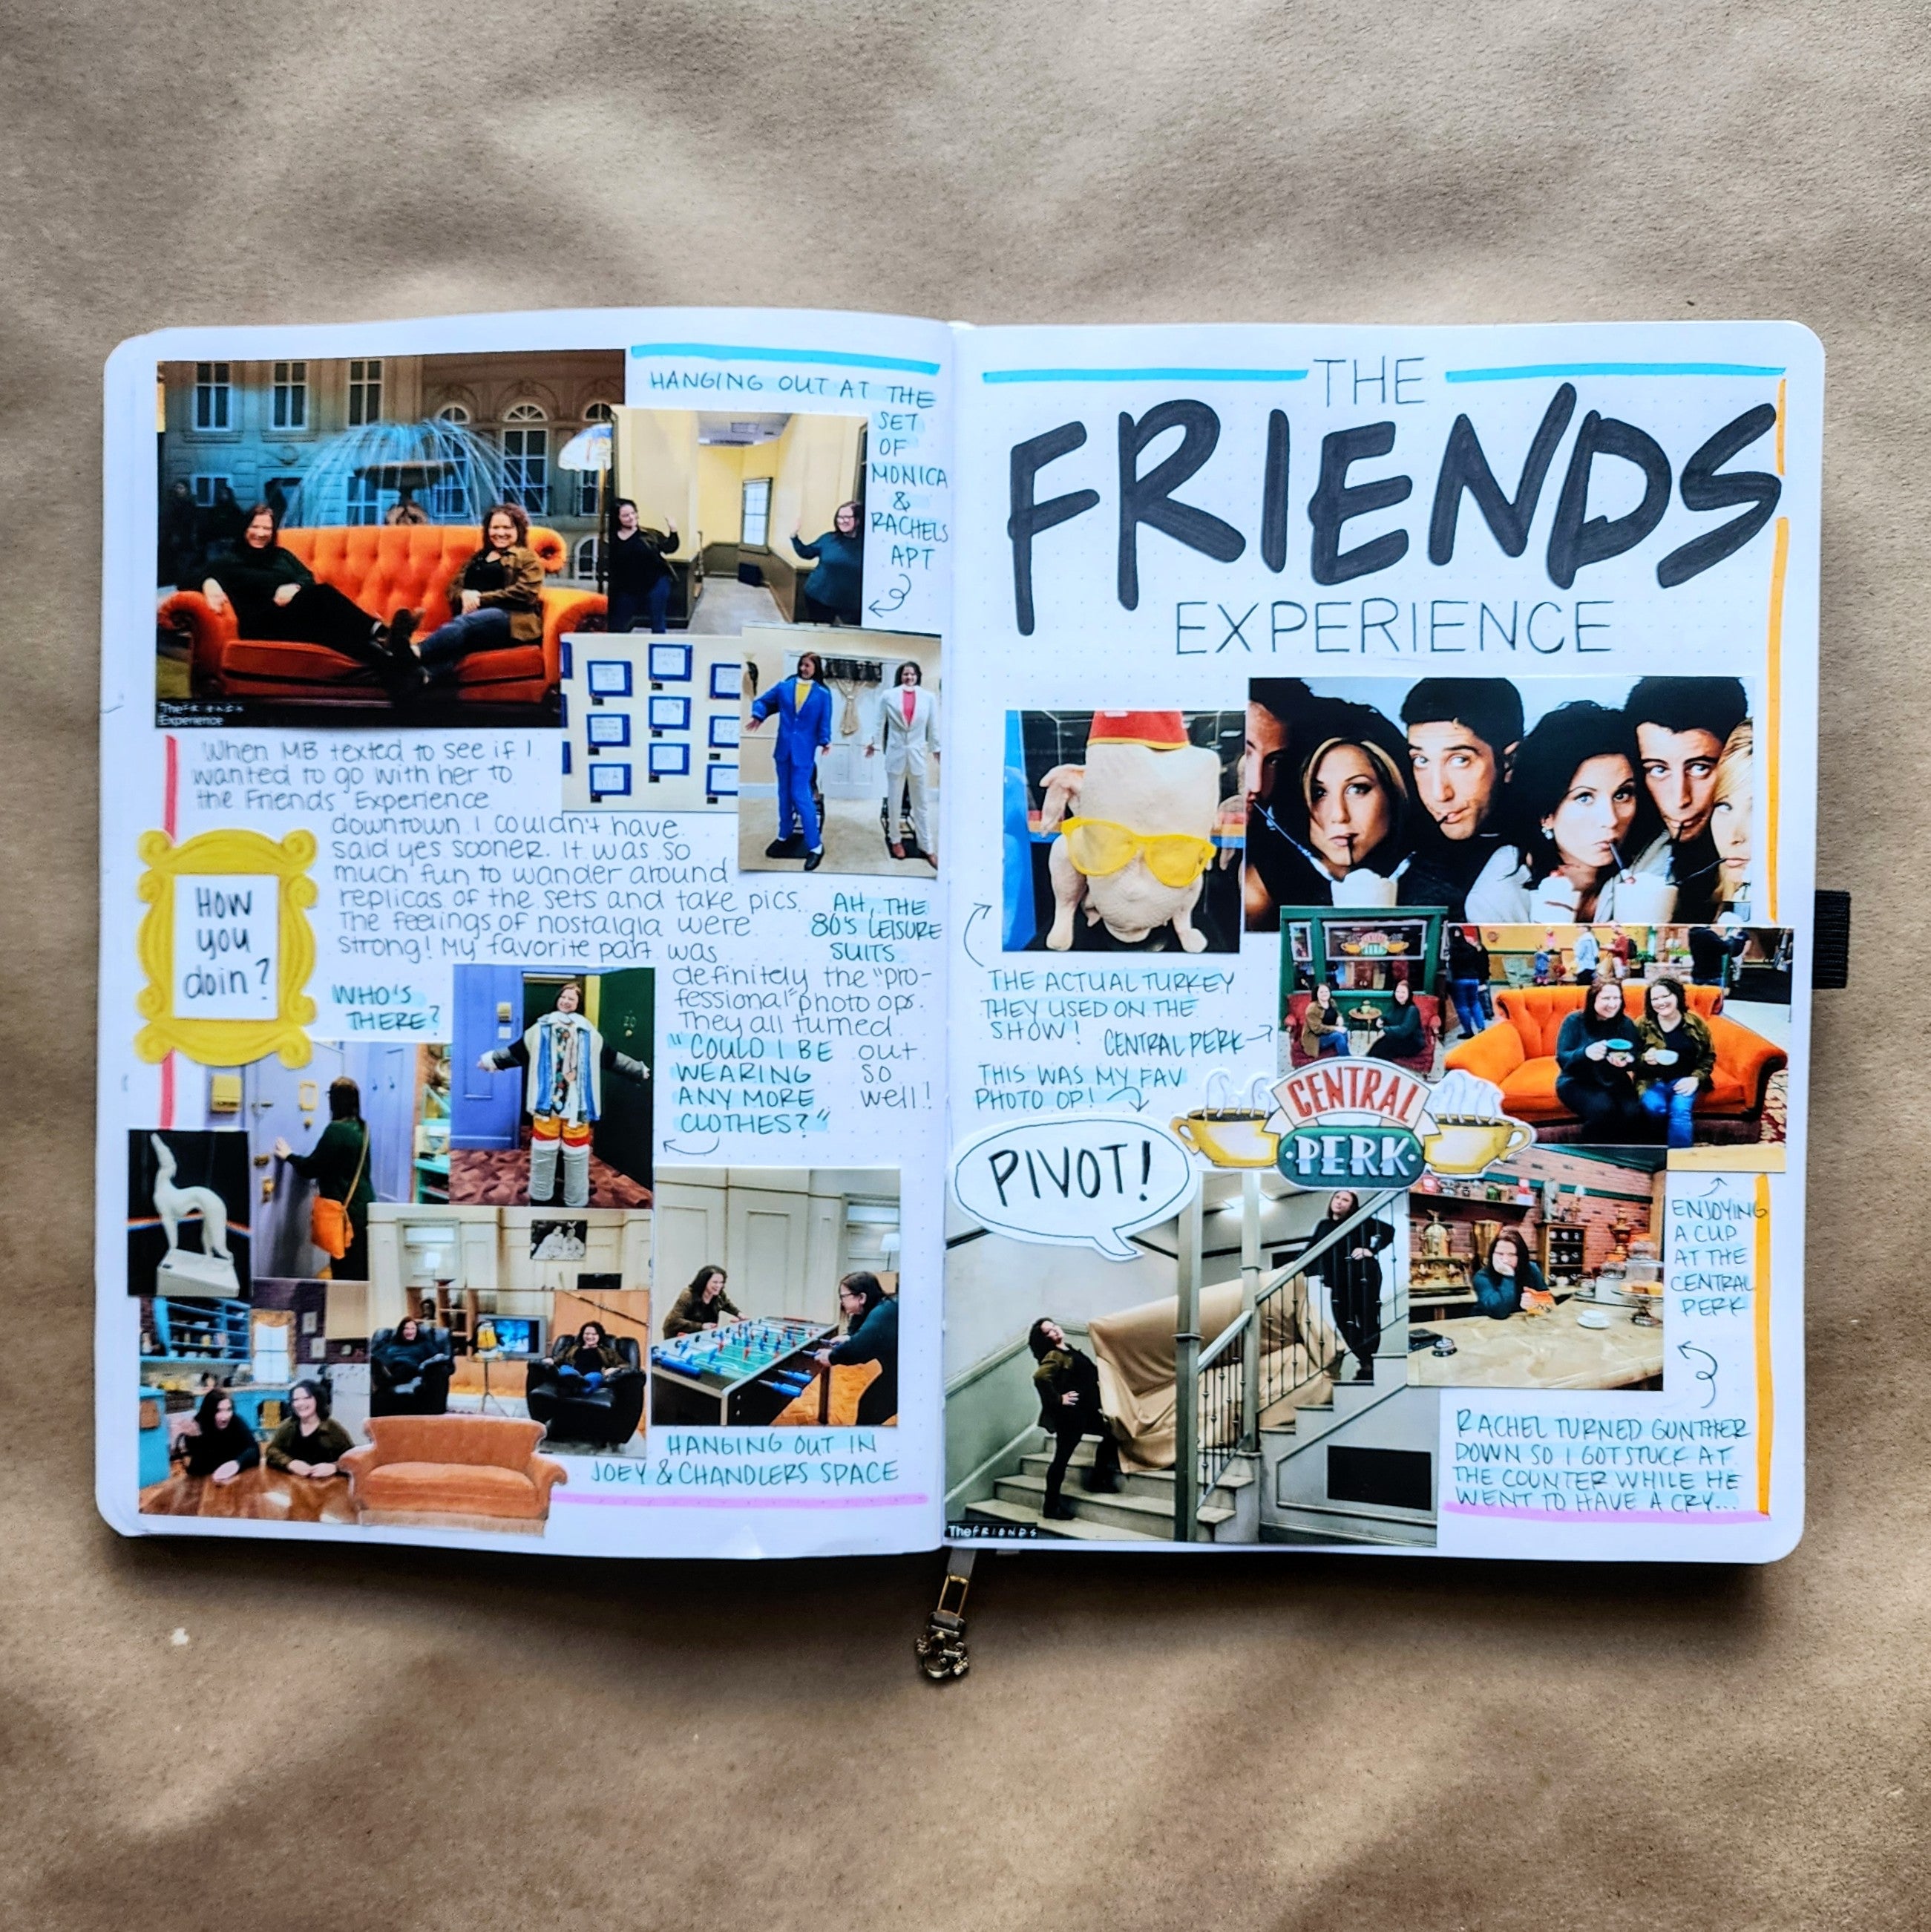 Documenting special events in a bullet journal using photos